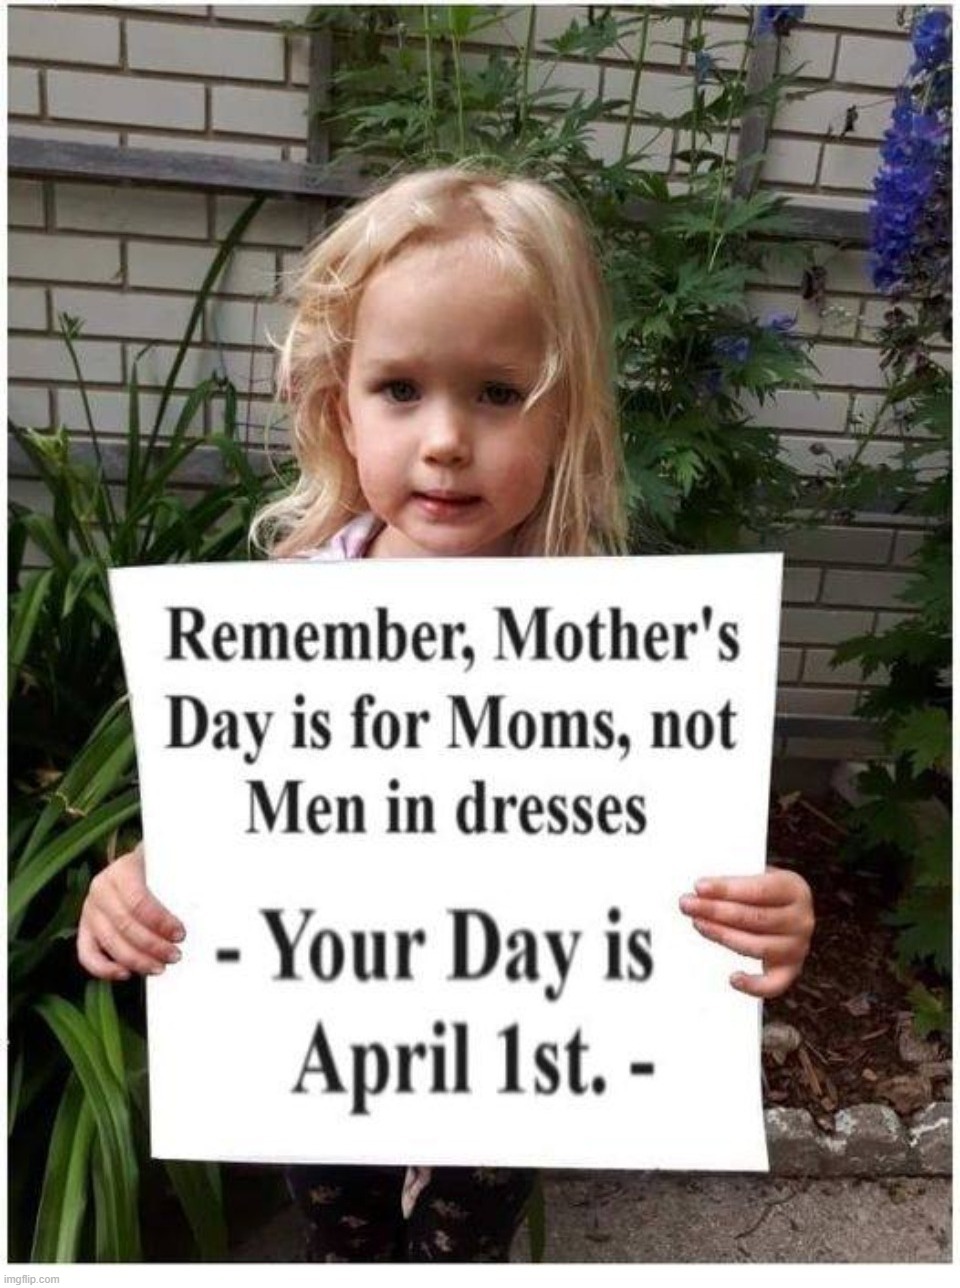 Remember, Mother's Day is for Moms; not Men in dresses. | image tagged in mothers day,moms,cross dressers,tired of hearing about transgenders,mother's day,happy mother's day | made w/ Imgflip meme maker